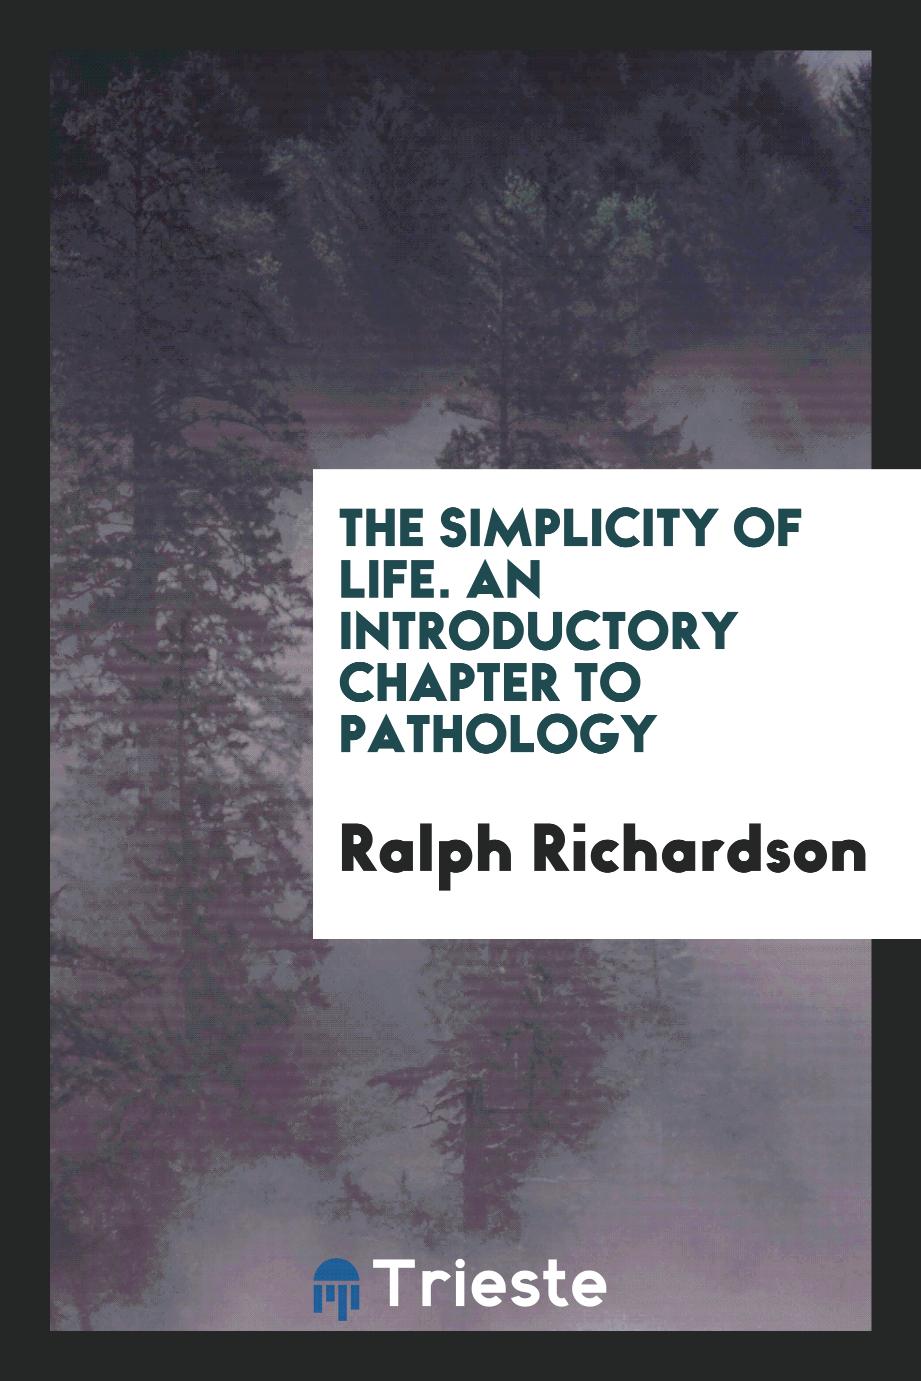 The Simplicity of Life. An Introductory Chapter to Pathology